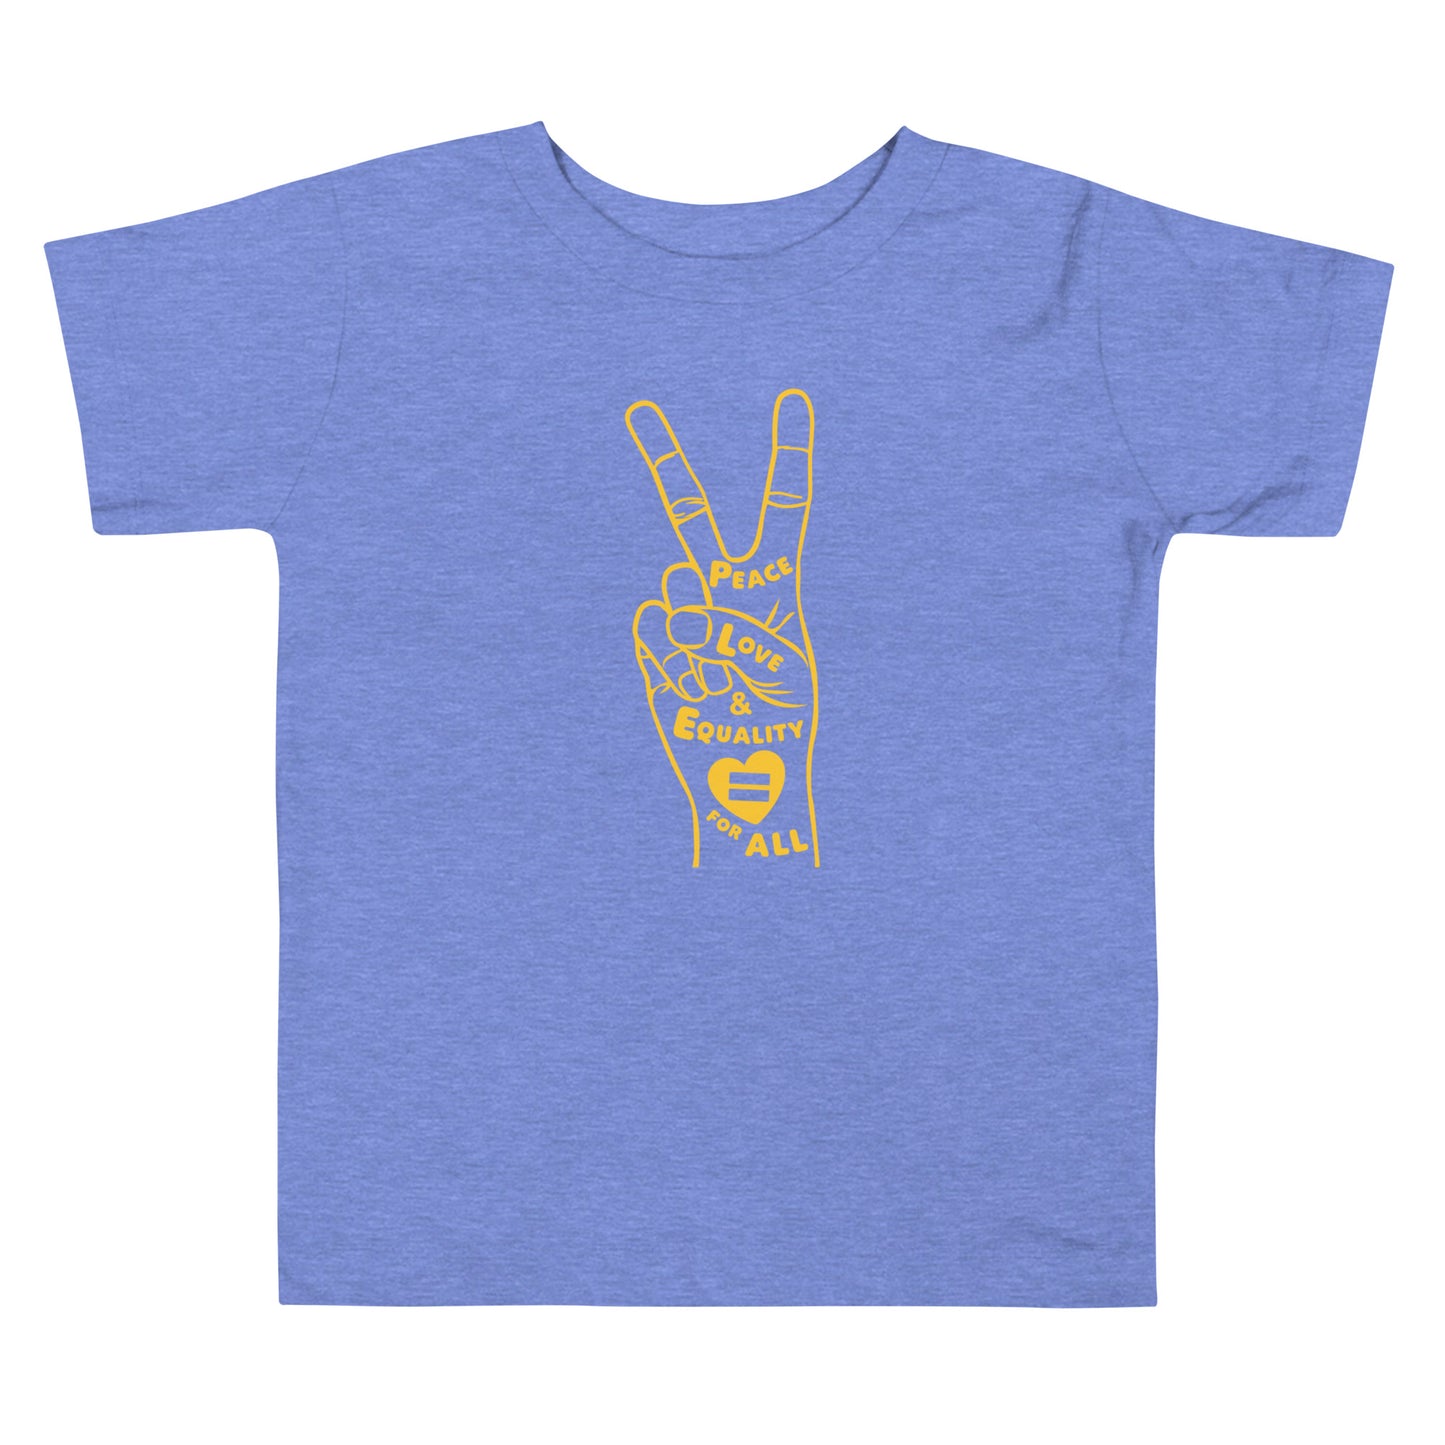 Peace, Love and Equality Toddler T-shirt